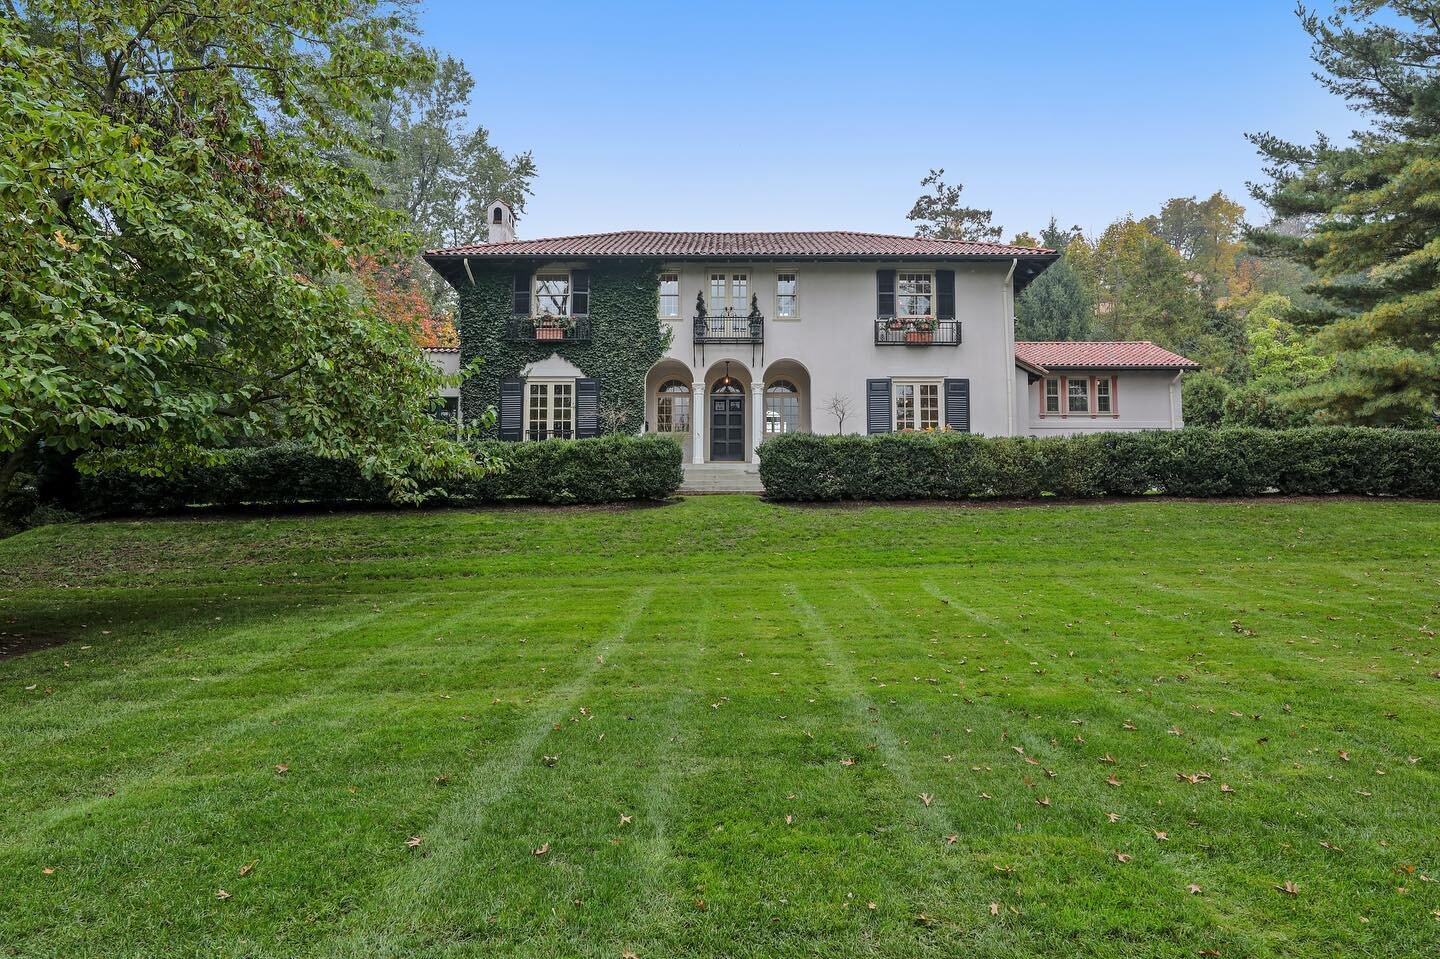 #MTCMarketMonday
.
.
Stunning Mediterranean style home at 46 Highland Avenue on 2/3 of an acre with seasonal NYC skyline views! 
.
.
🤍 Built in 1924⠀
🤍4-5 beds
🤍 3 full baths, 1 half (2 ensuite including the primary and bedroom 2, one hall bath)⁠⠀